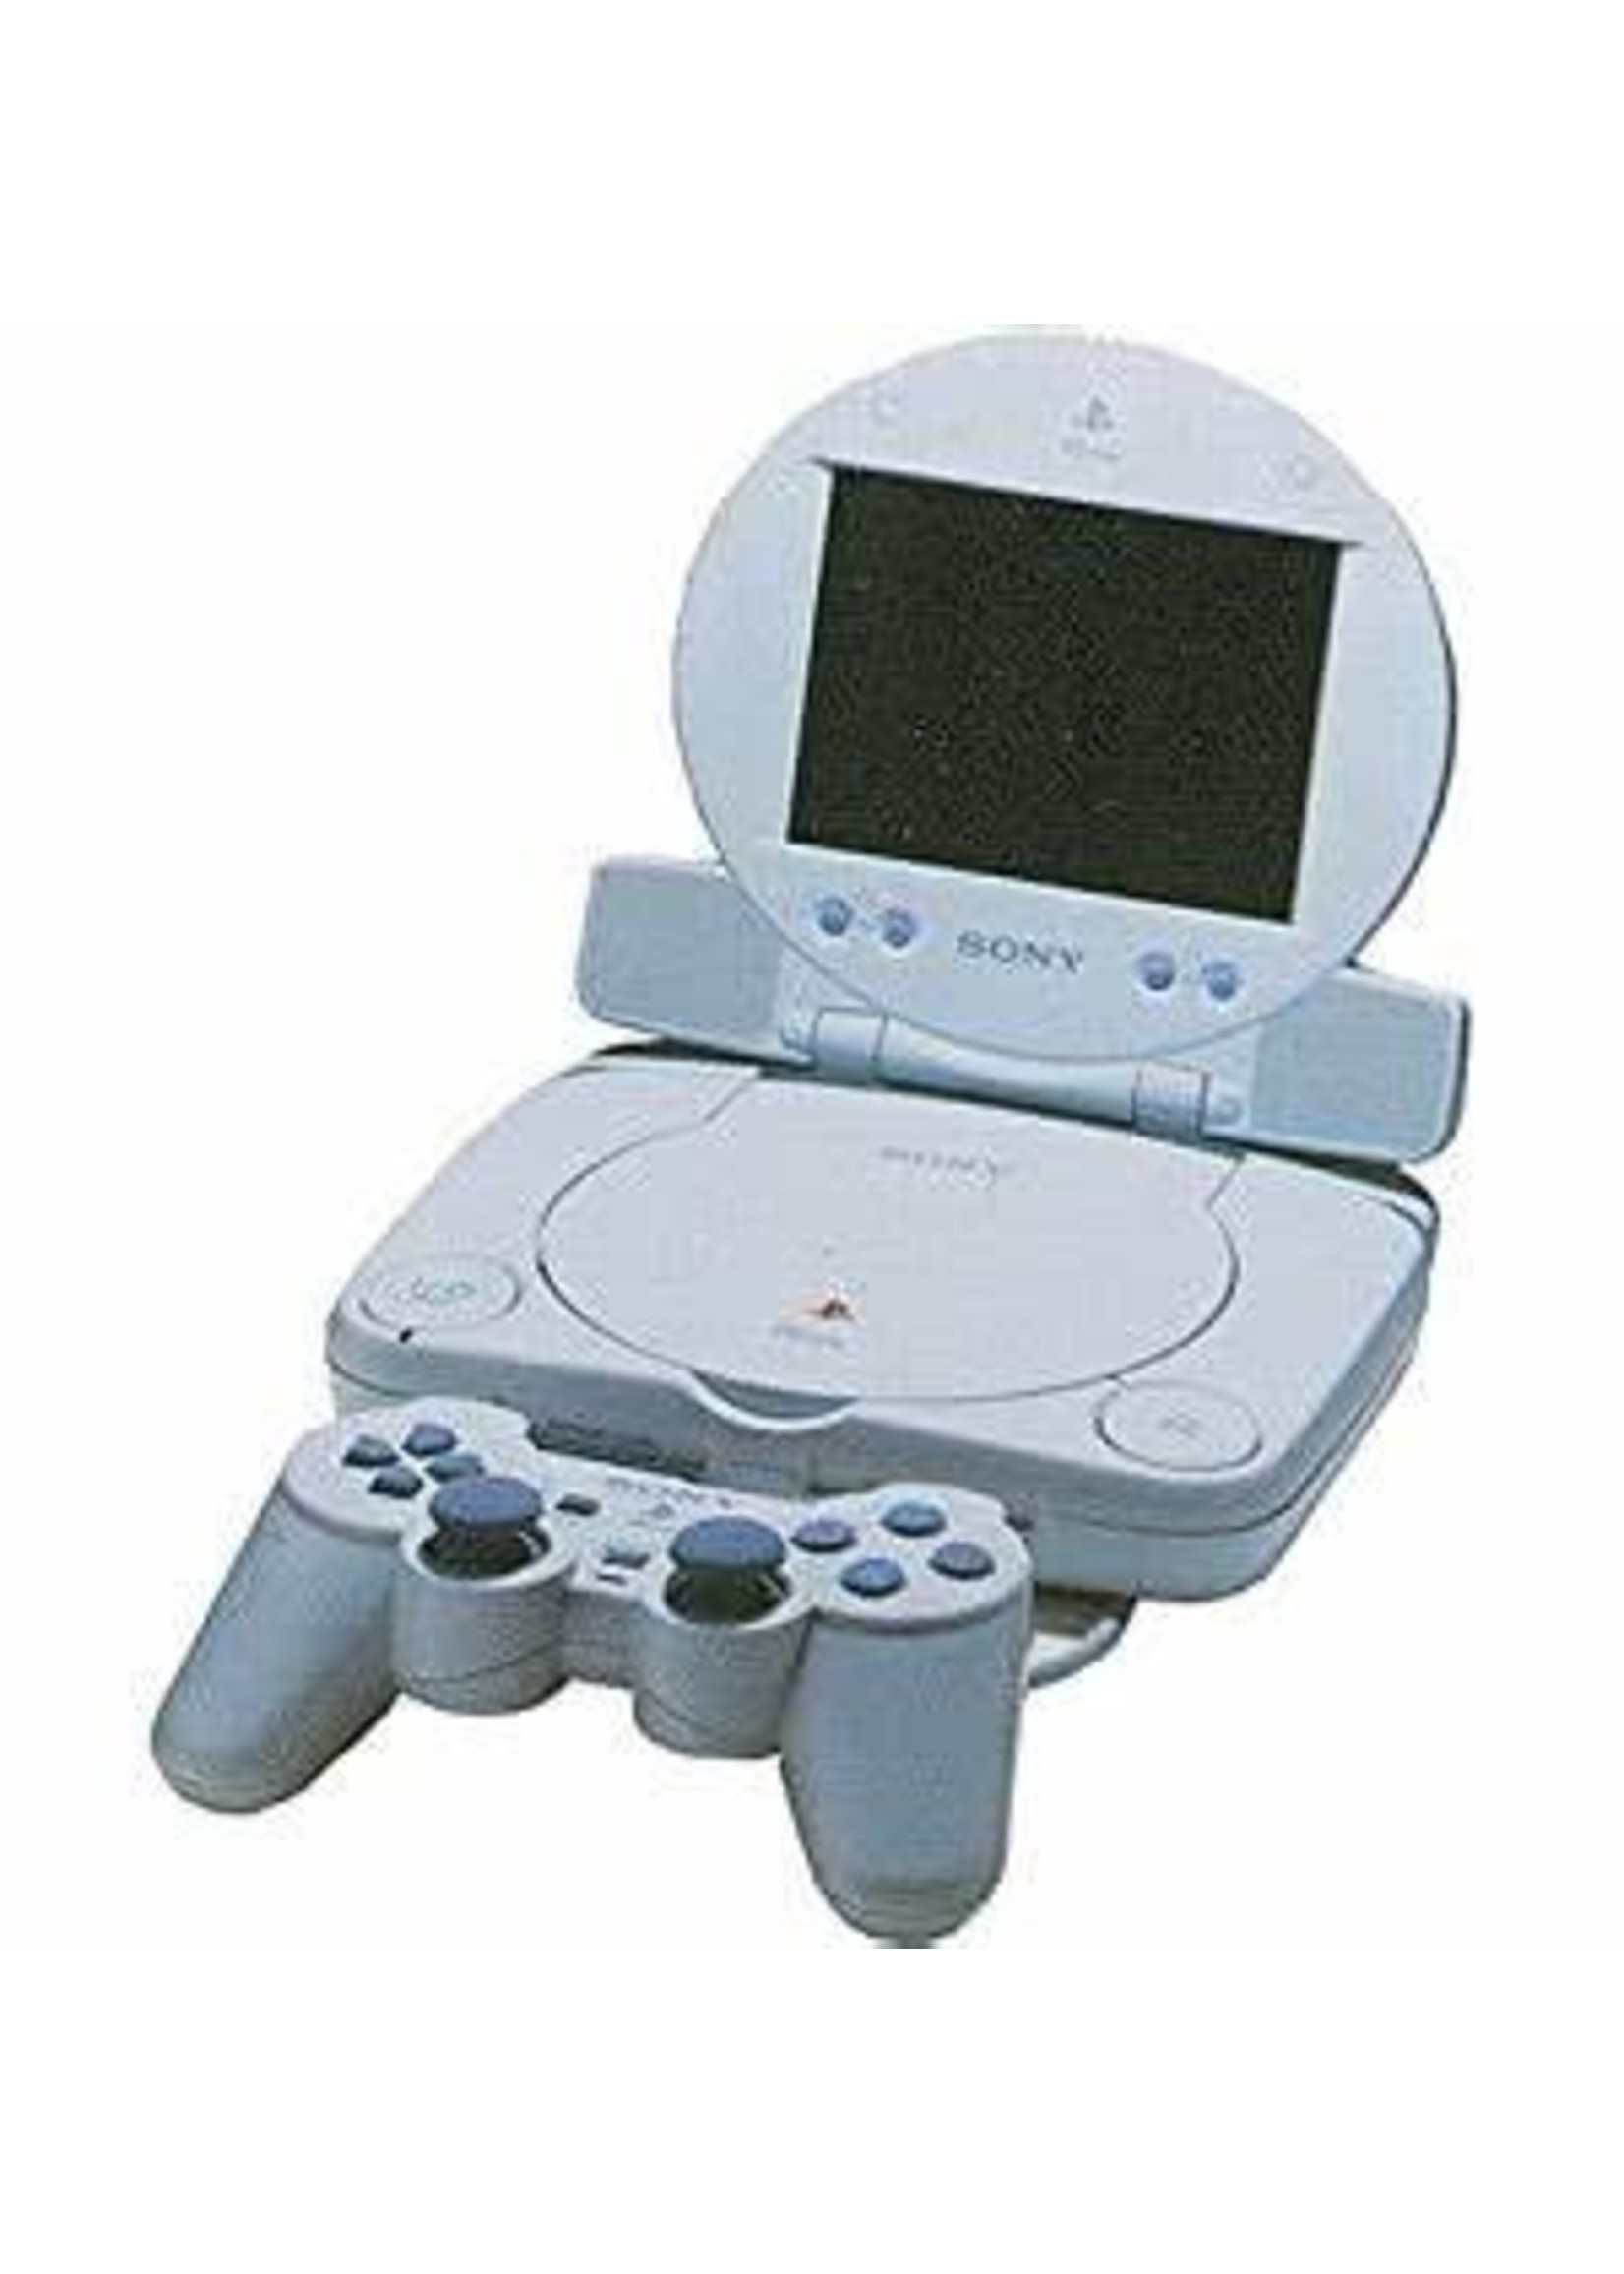 PS1 With LCD Screen and Bag